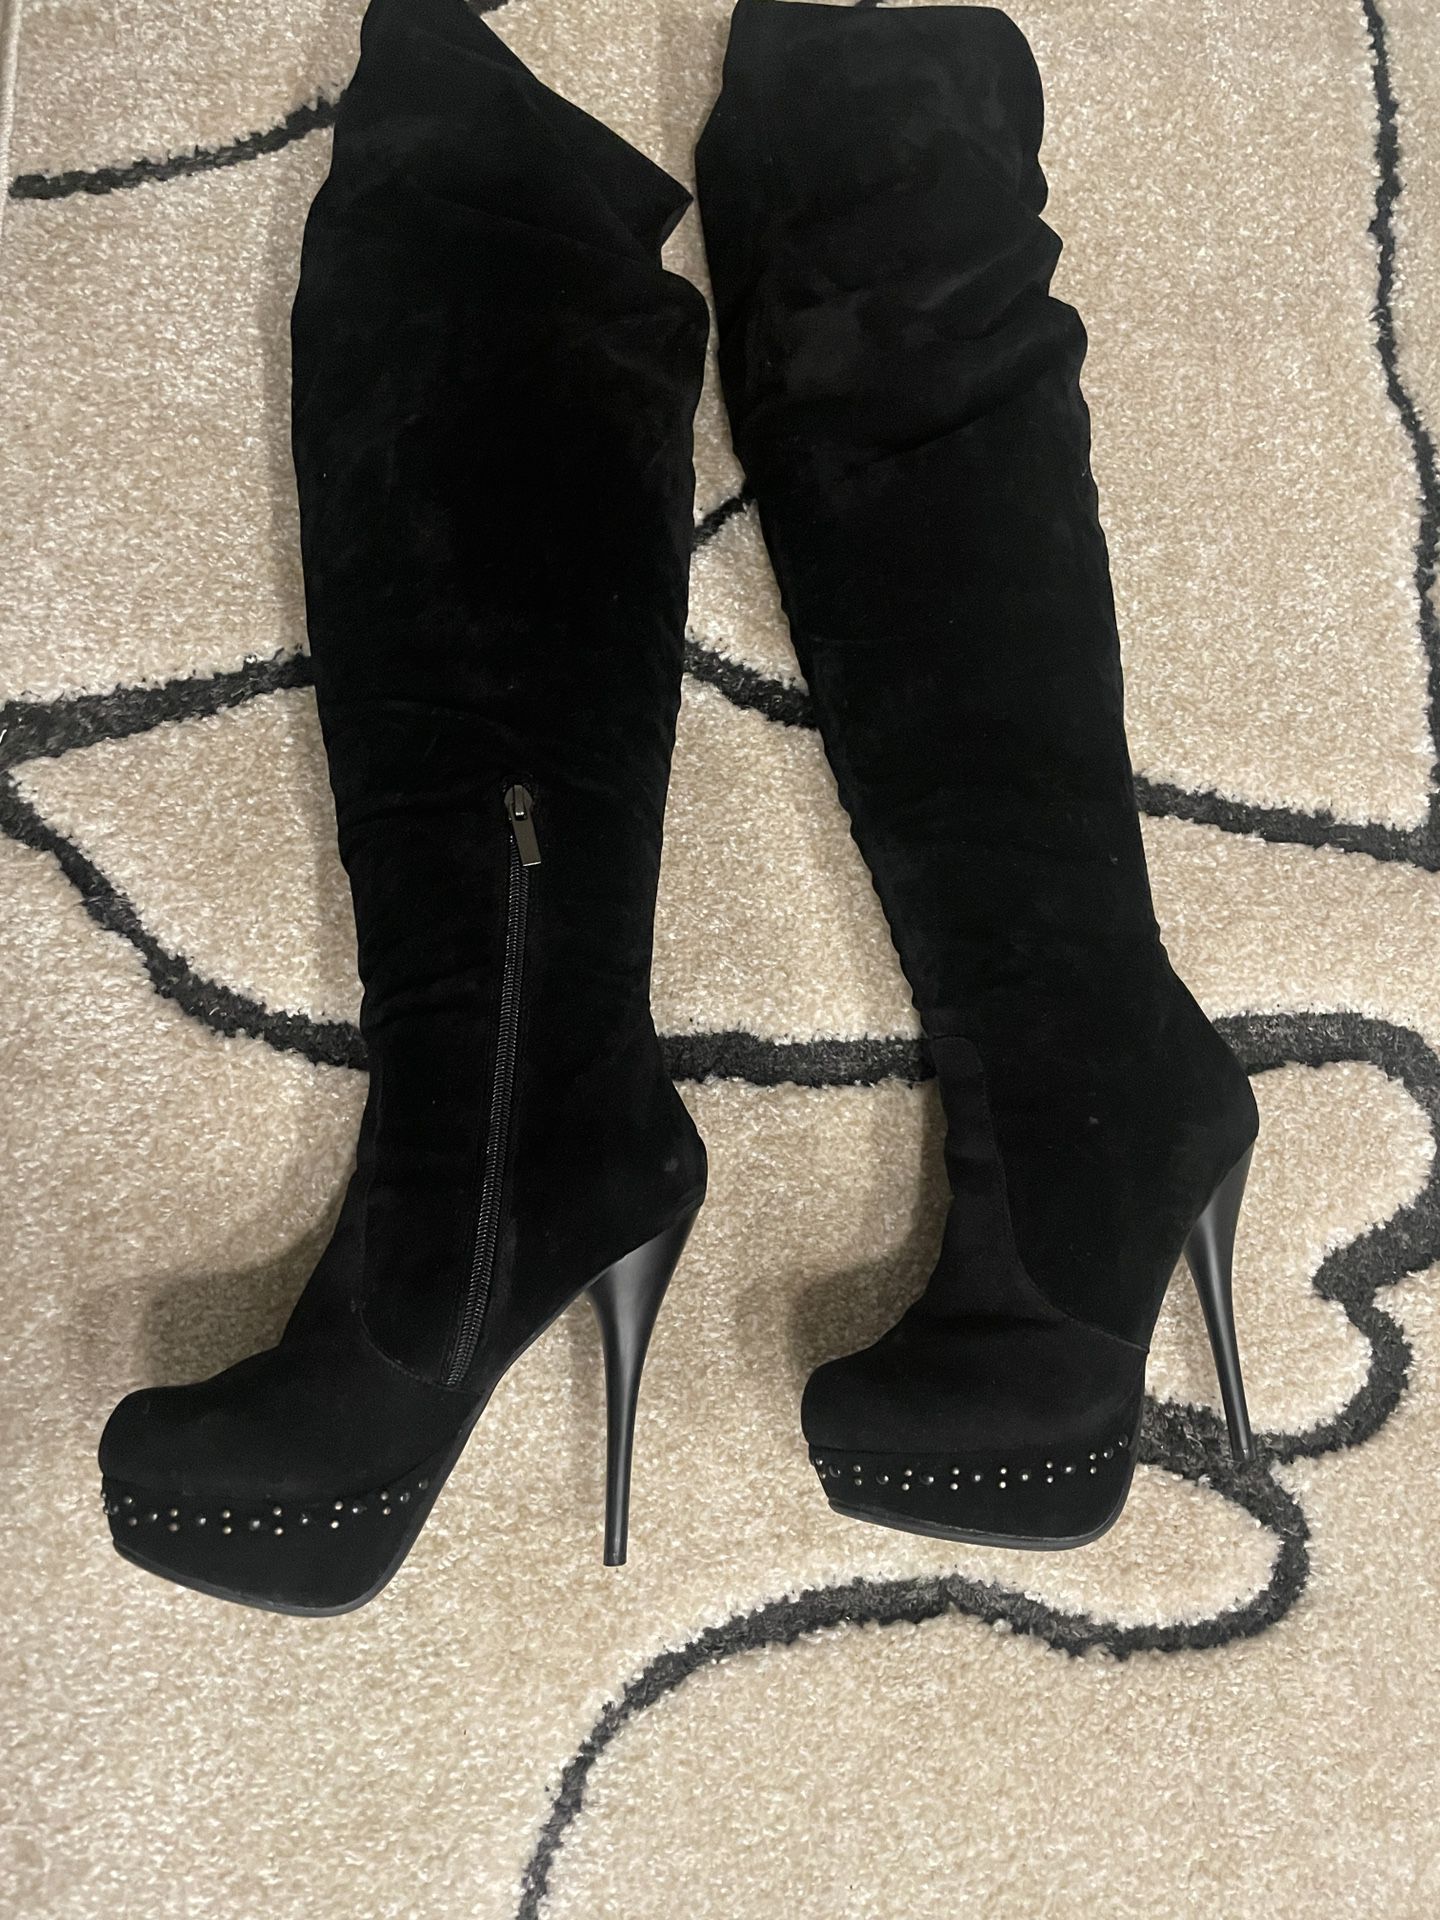 Black Thigh high Suede-Like Boots - Size 7